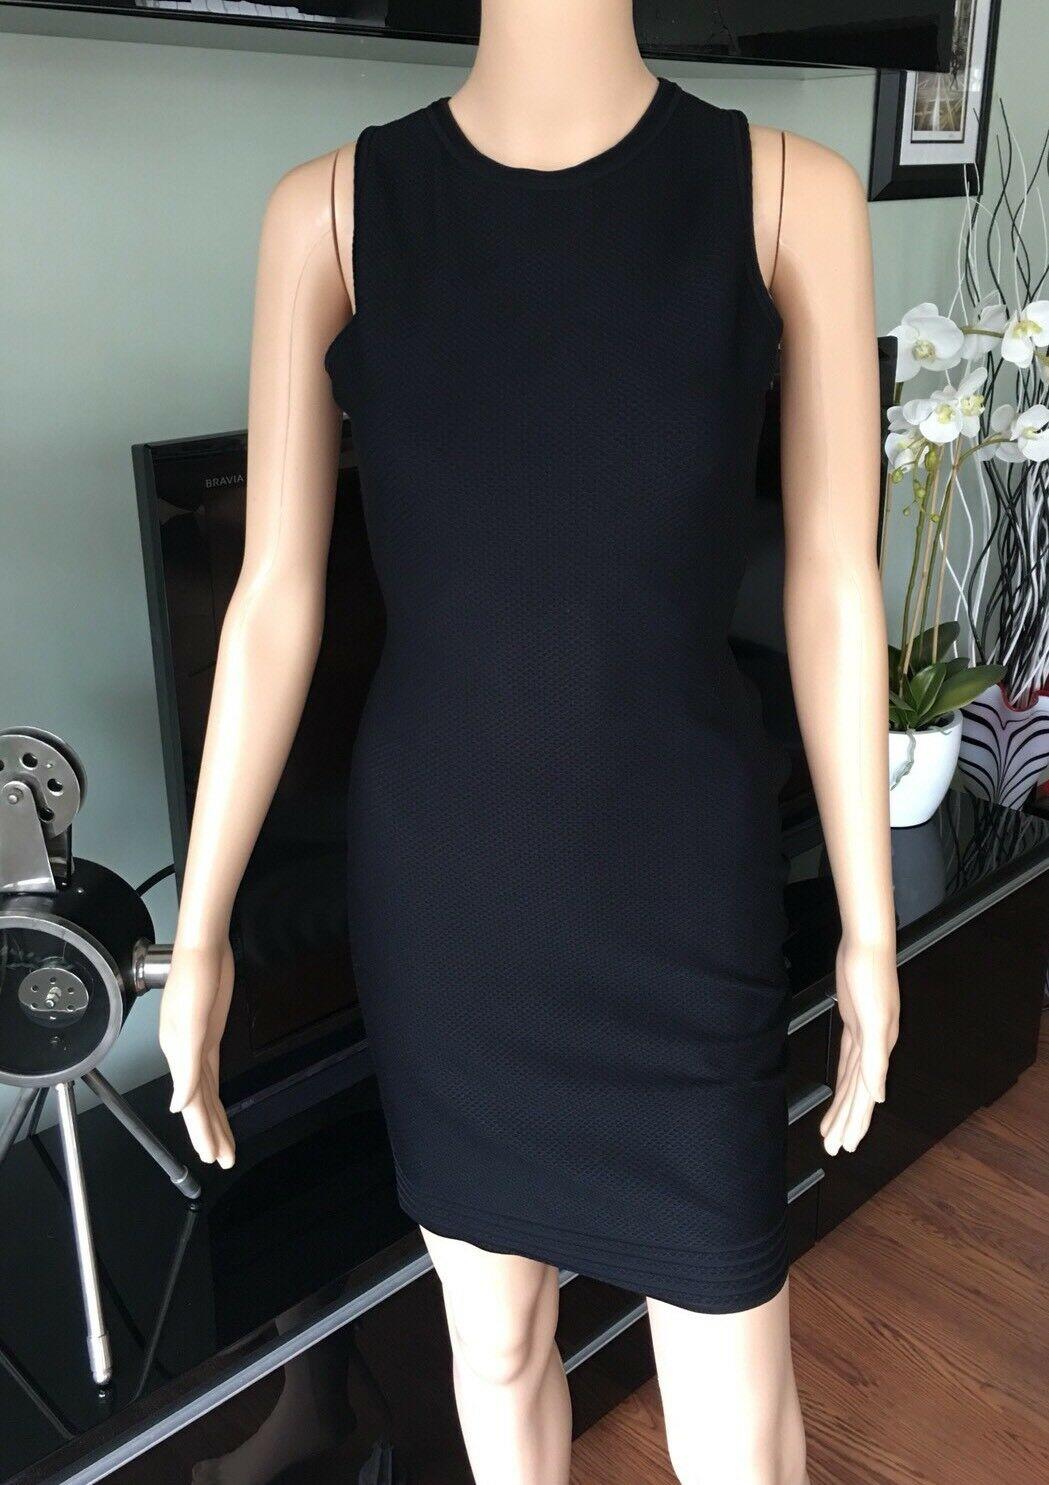 Azzedine Alaia Sexy Open Back Fitted Dress Size FR 38

Black Alaïa sleeveless knit mini dress with crew neck, cross-over straps at open back and concealed zip closure at side.

All Eyes on Alaïa

For the last half-century, the world’s most